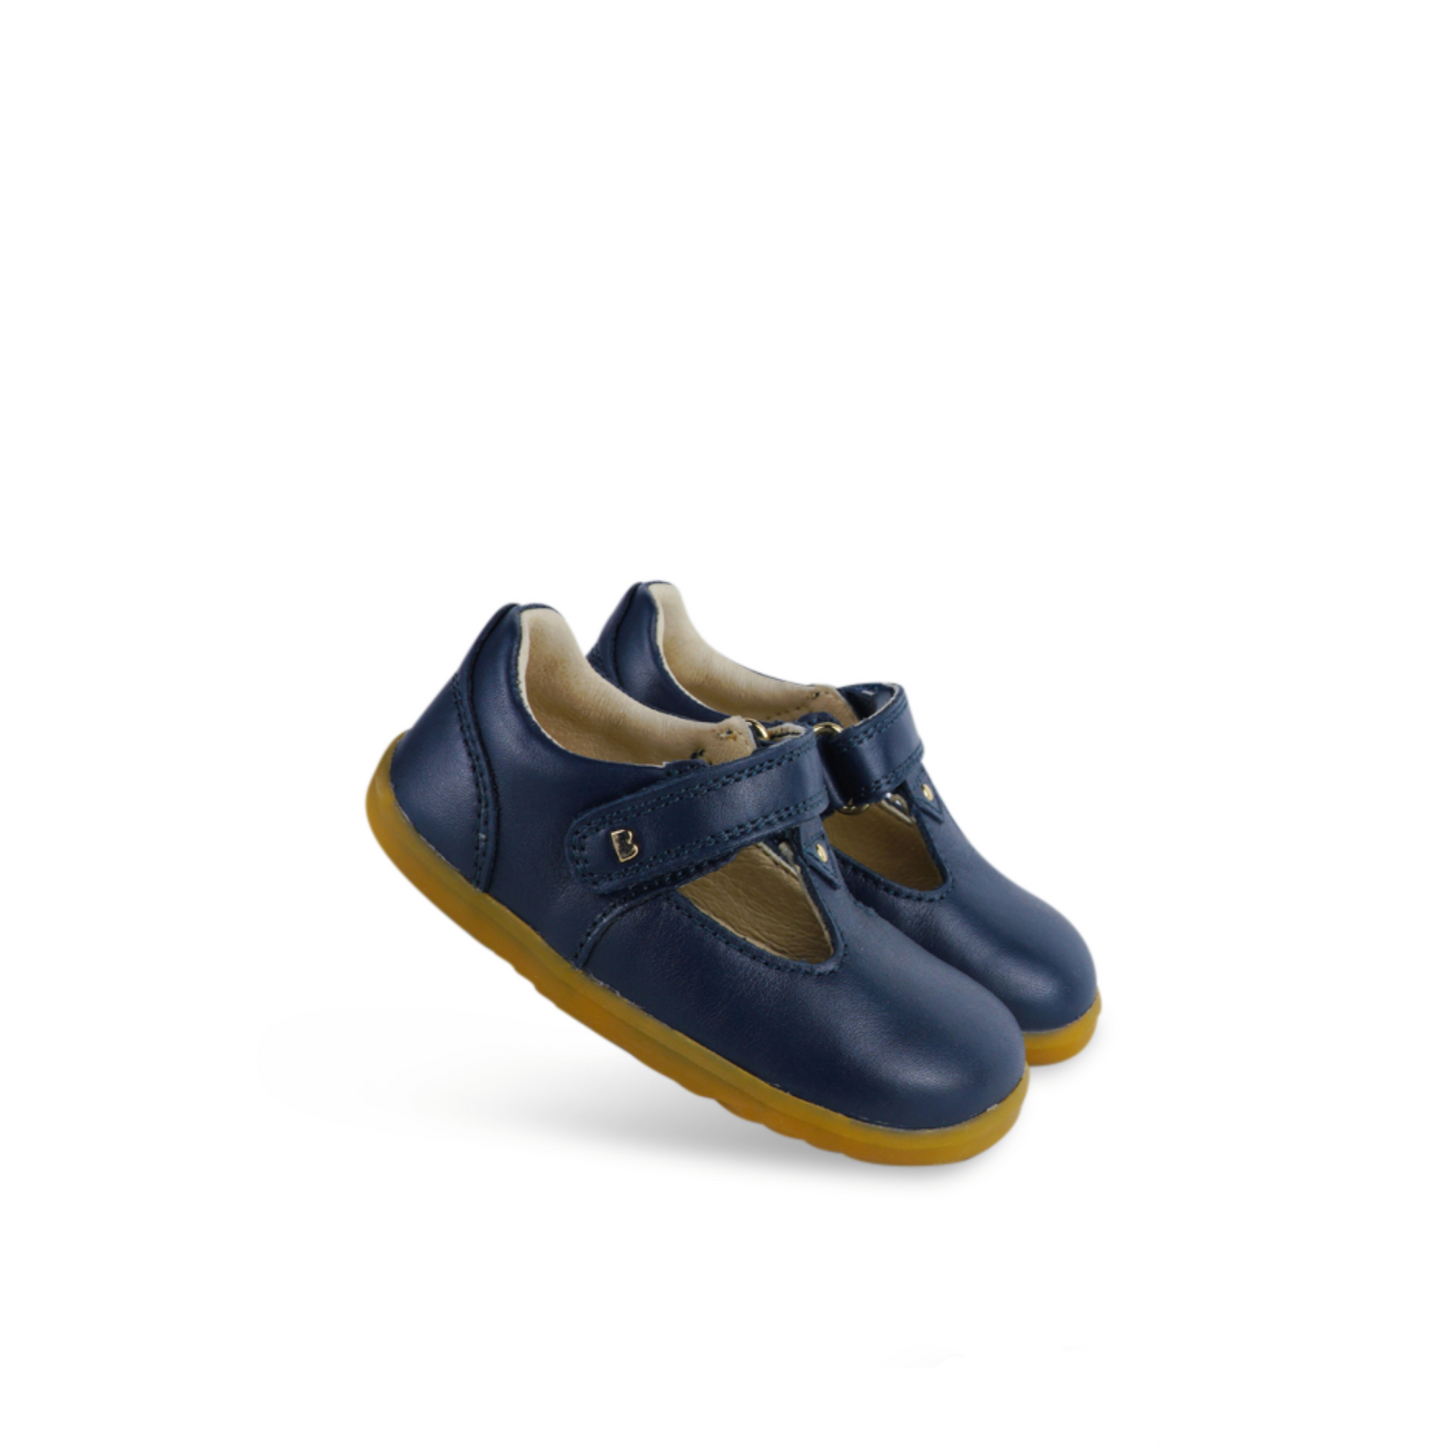 Bobux Louise Midnight Navy Leather Shoes